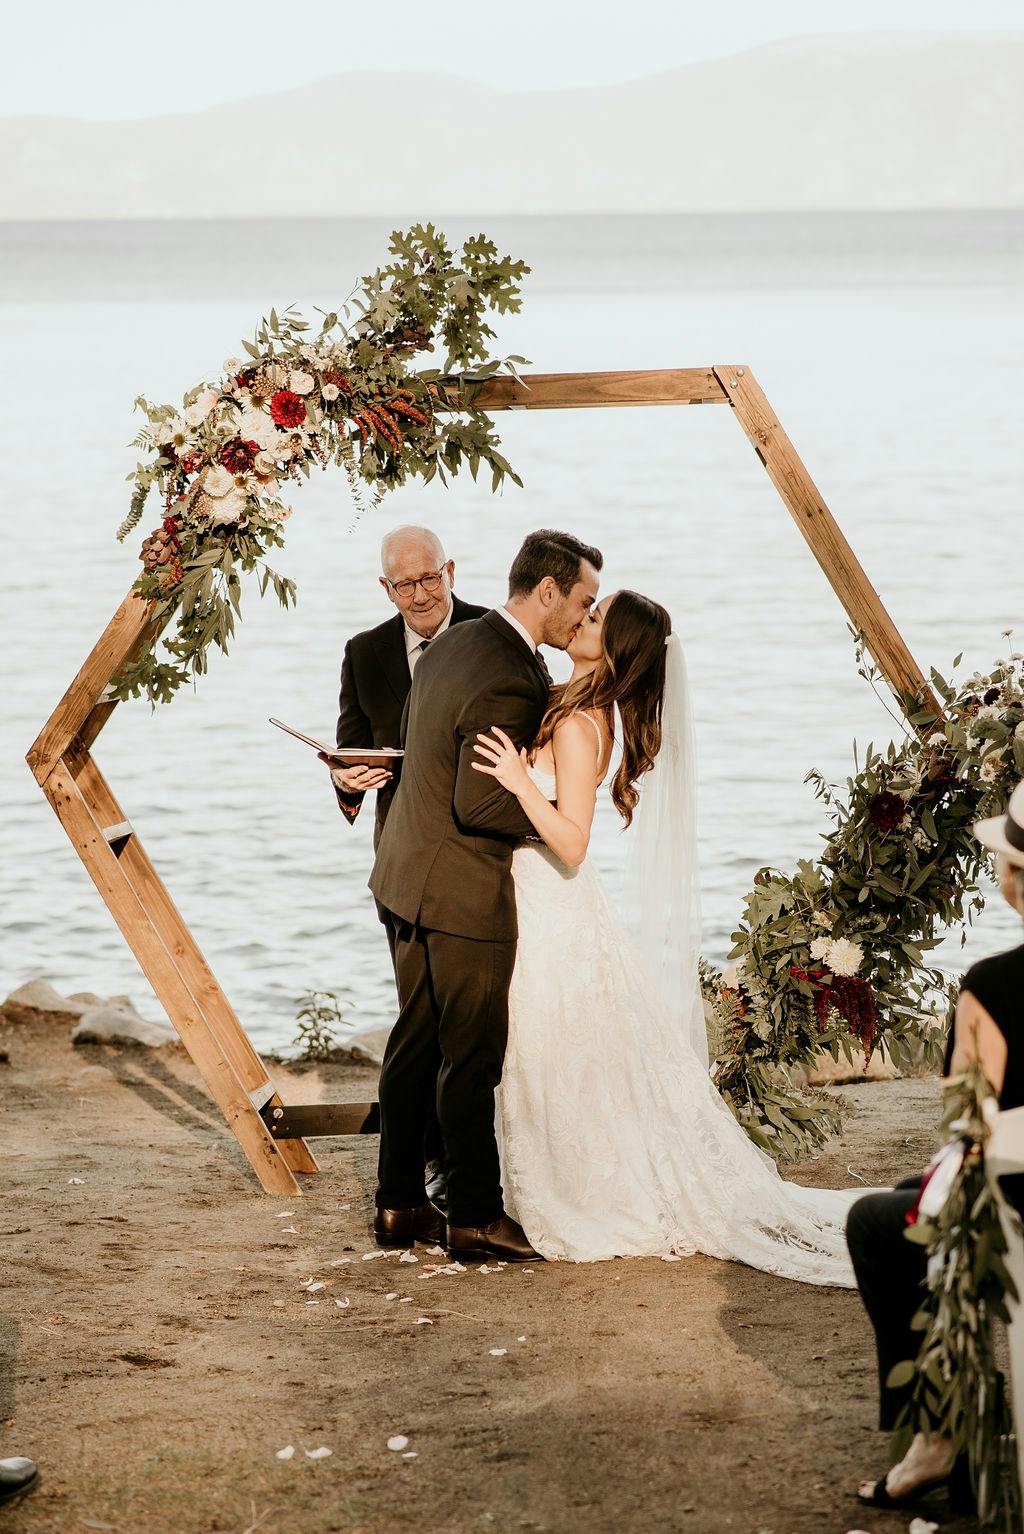 36 Boho Wedding Ideas for Free-Spirited Brides and Grooms